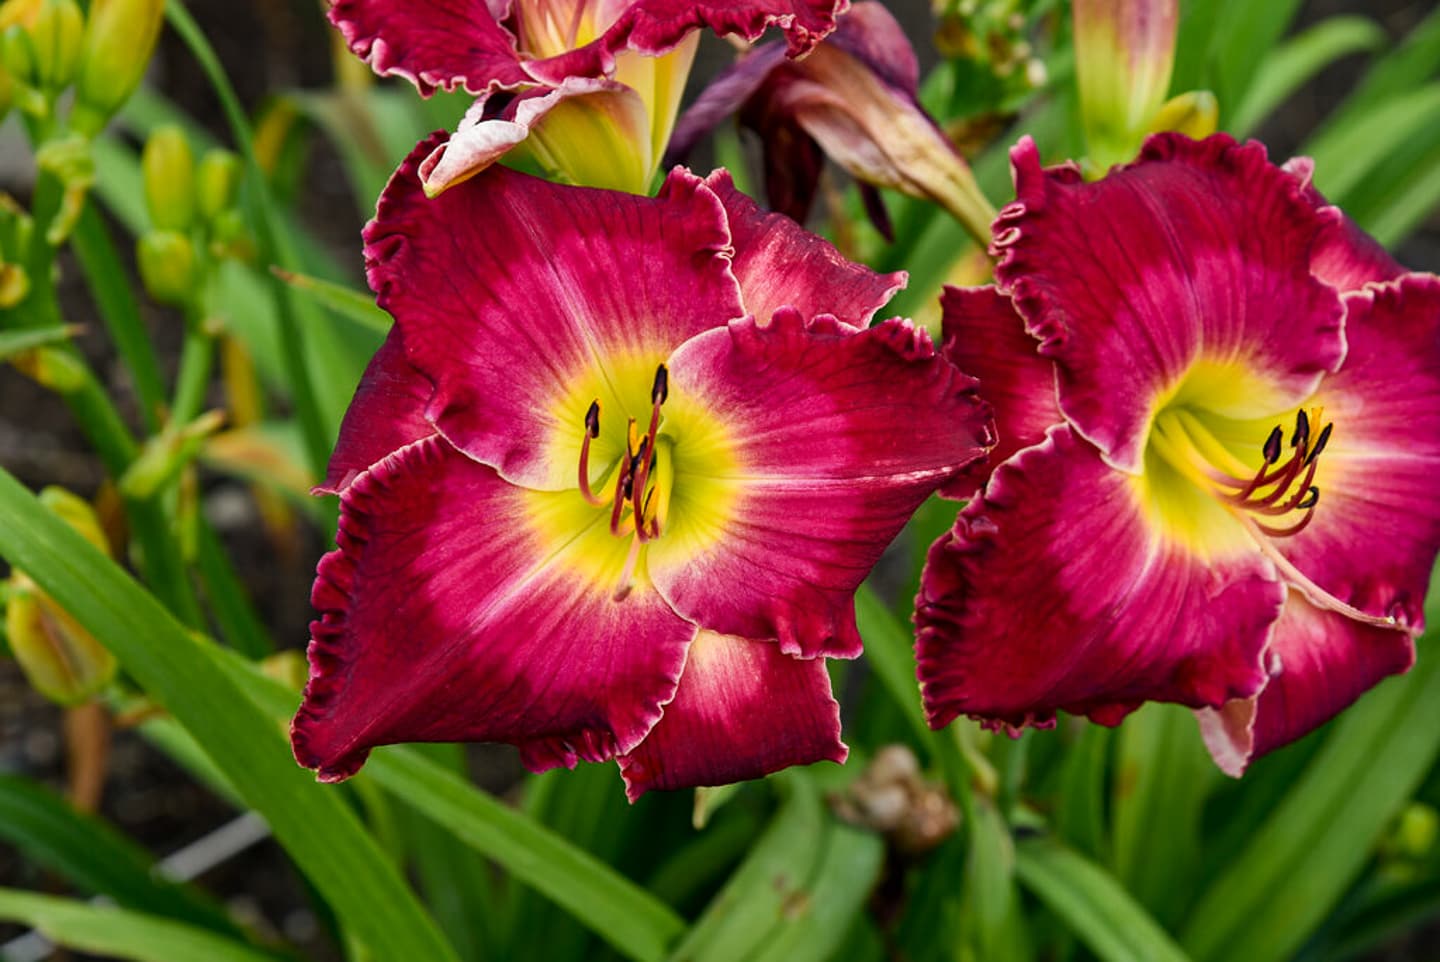 3 Day Lily 'Blood, Sweat and Tears' flowers